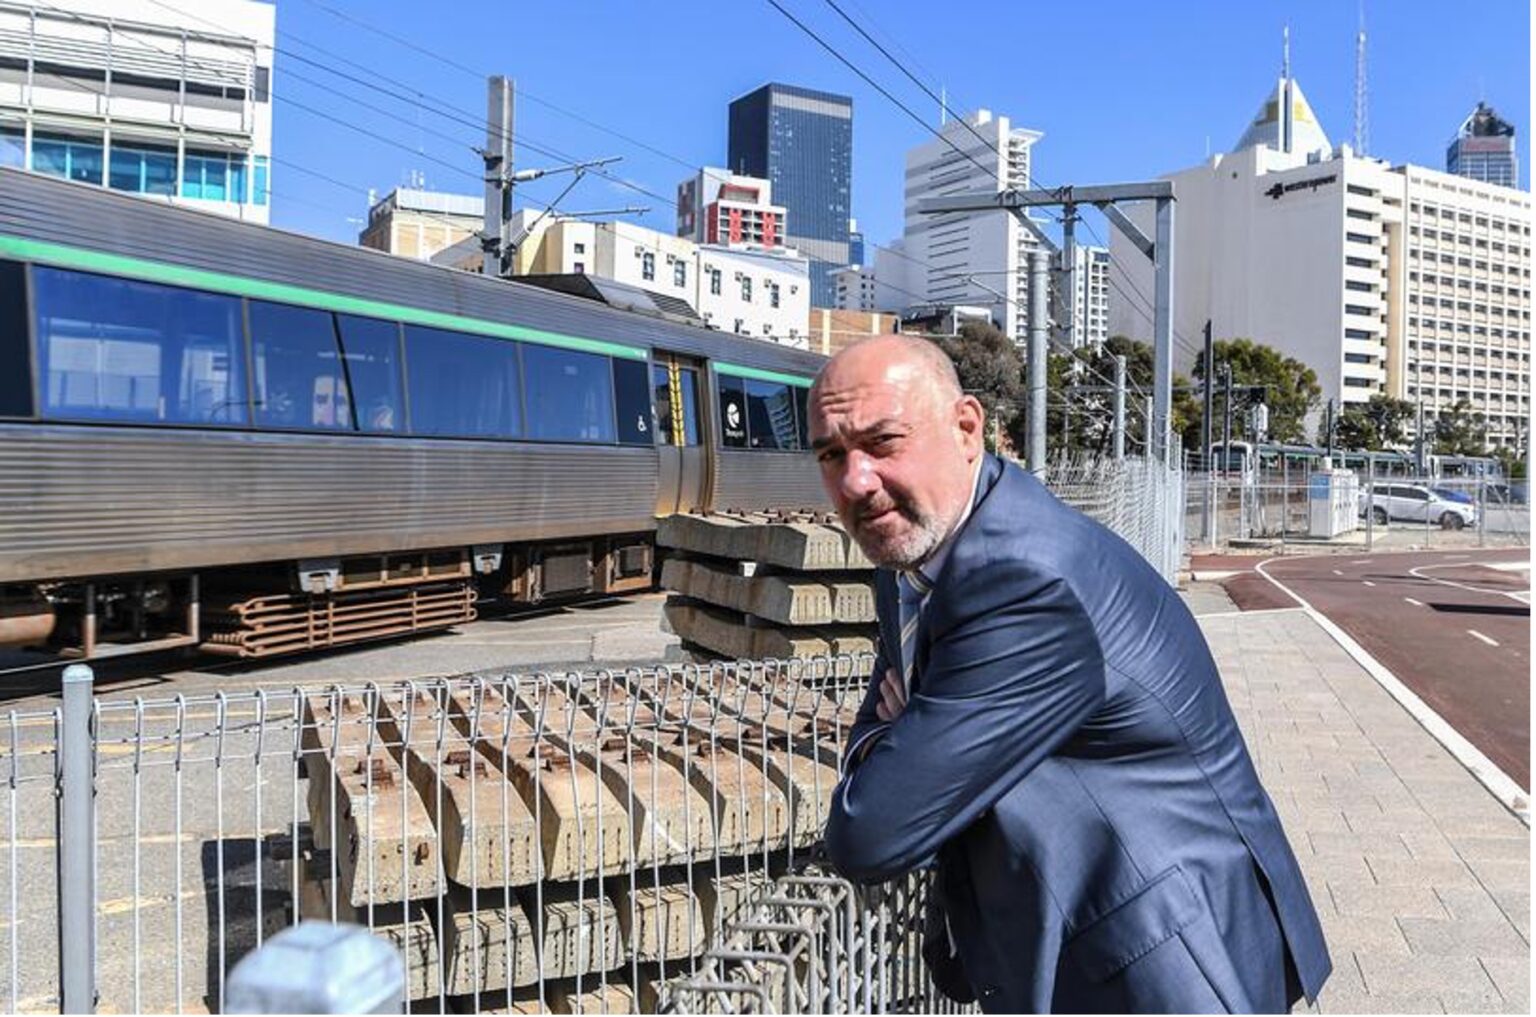 THE WEST AUSTRALIAN: TOP PERTH PROPERTY EXPERT SAYS MCIVER STATION SHOULD BE SUNK TO MAKE WAY FOR PARISIAN-STYLE INNER-CITY LIVING